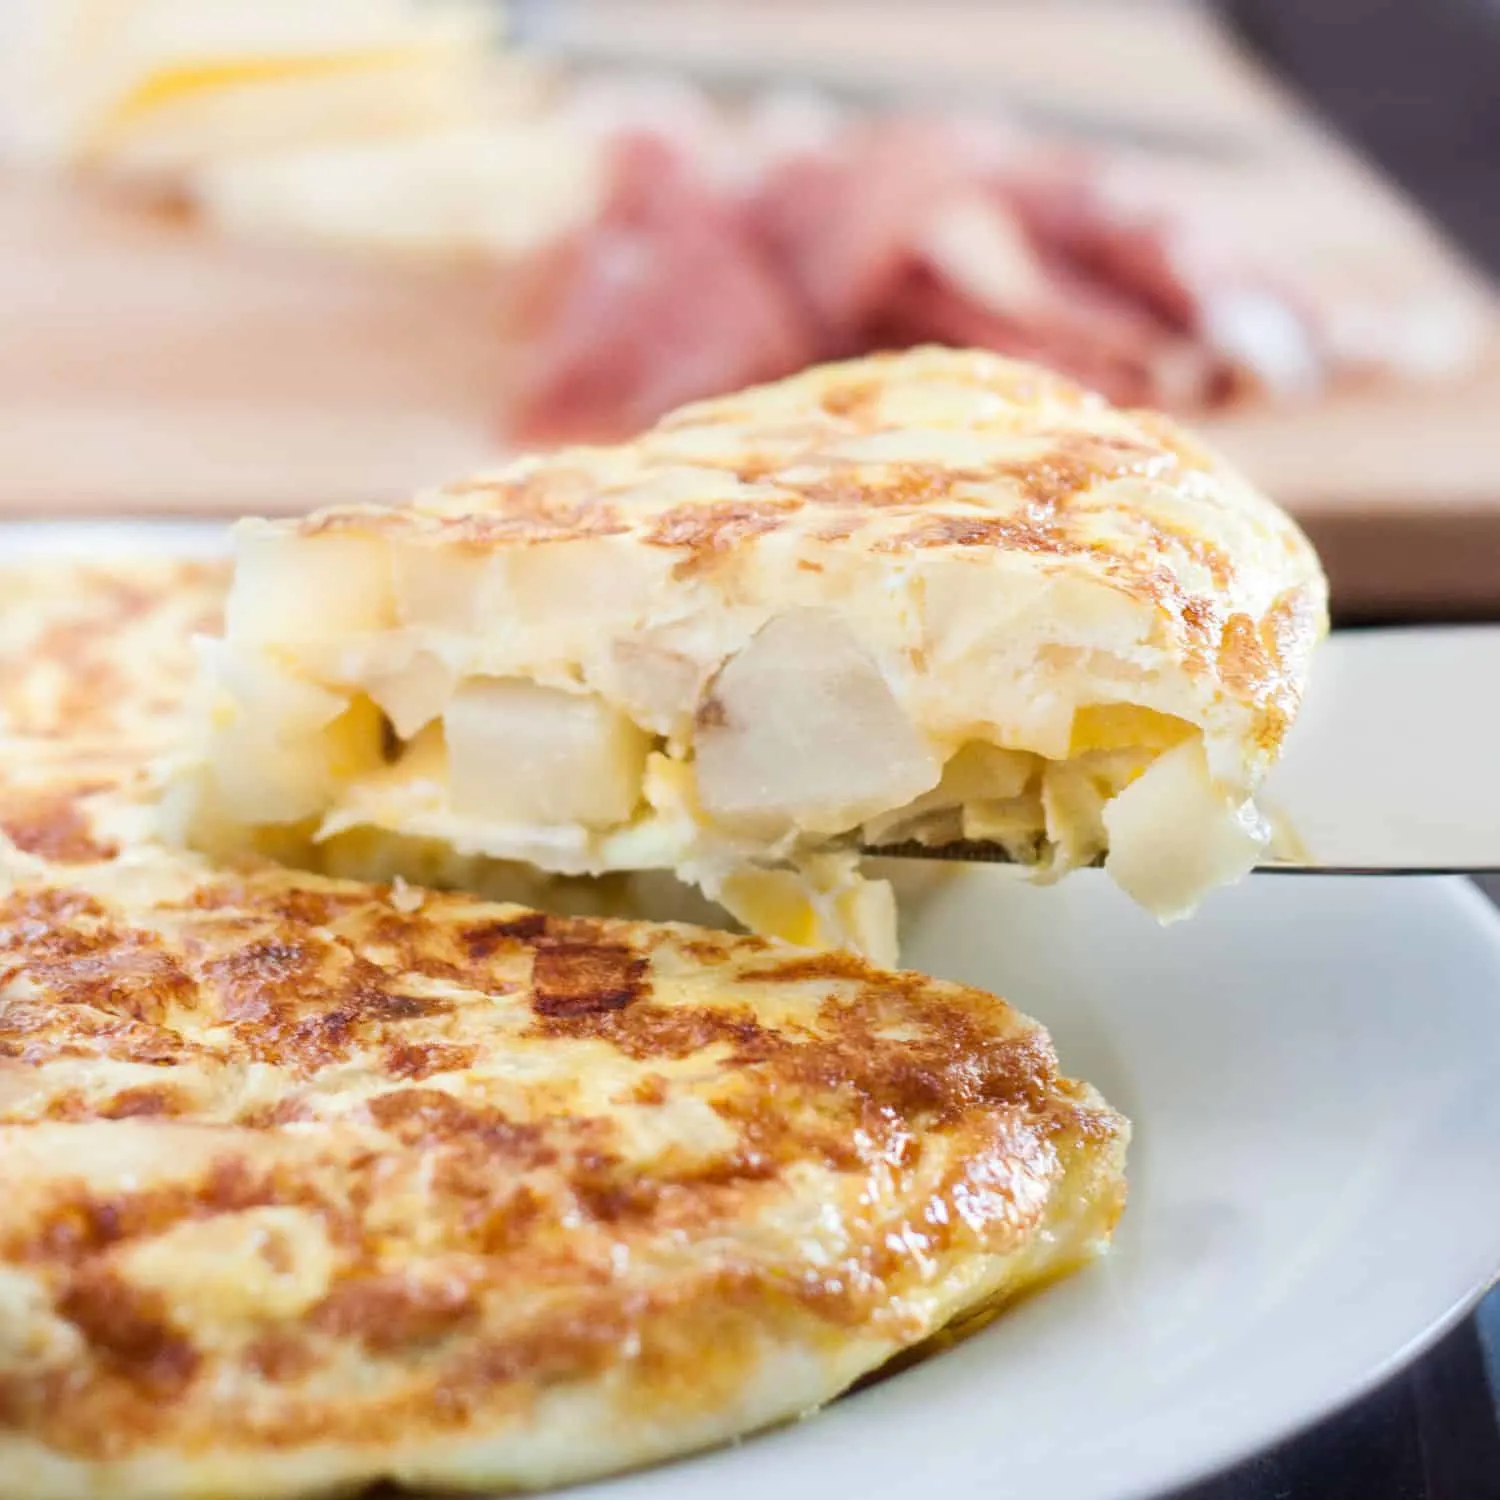 Tortilla Espanola - Spanish Tortilla - is a classic egg and potato dish with infinite variations served all over Spain and in some parts of the Caribbean. An easy budget meal, tortilla can be served any time of day, or cut into cubes and served as a party appetizer! Recipe and variations on GoodieGodmother.com